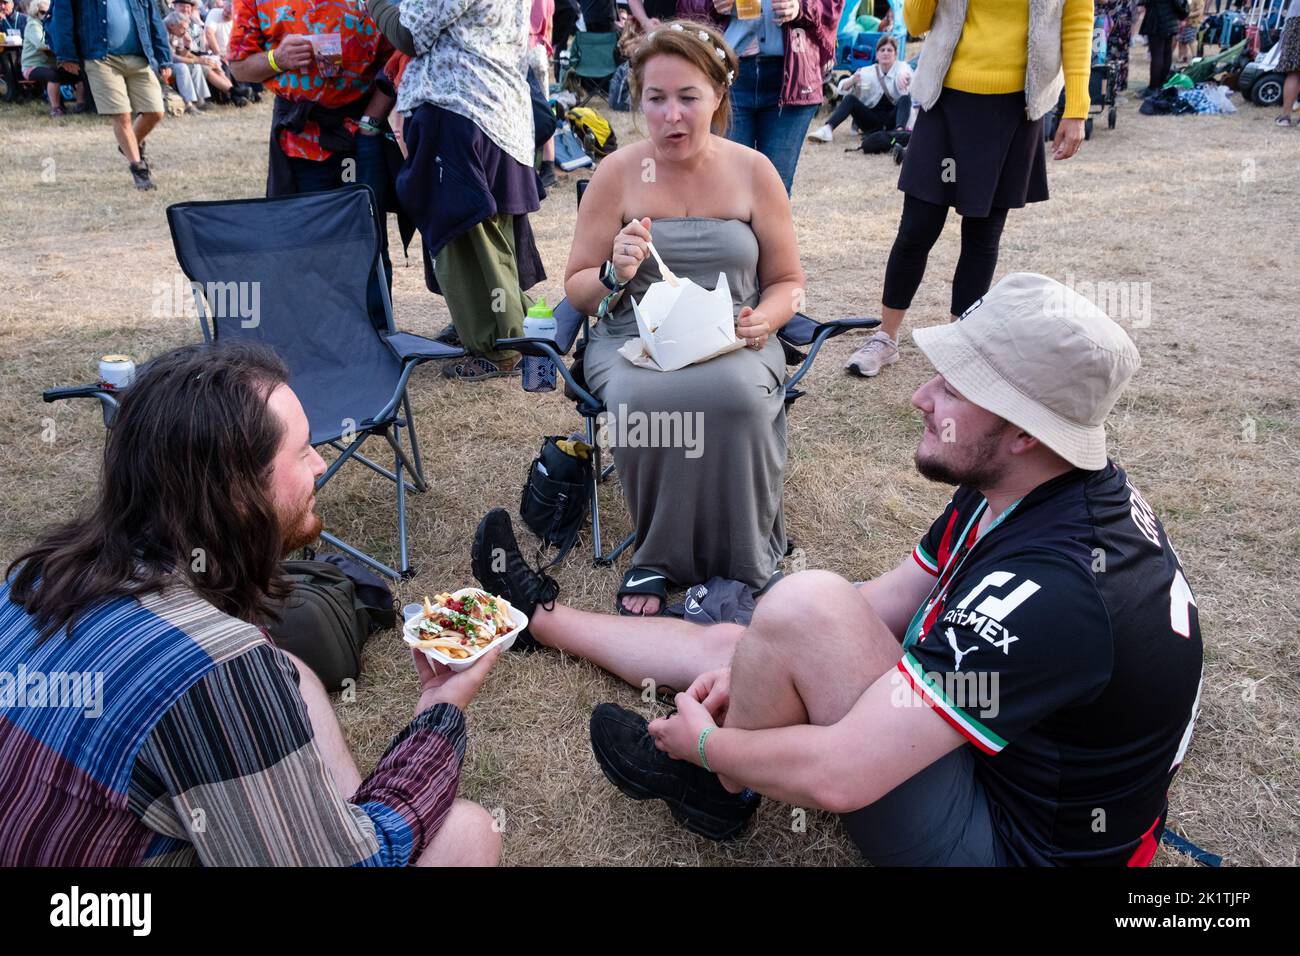 Fast food time for the festival crowd at the Green Man 2022 music festival in Wales, UK, August 2022. Photograph: Rob Watkins/Alamy Stock Photo